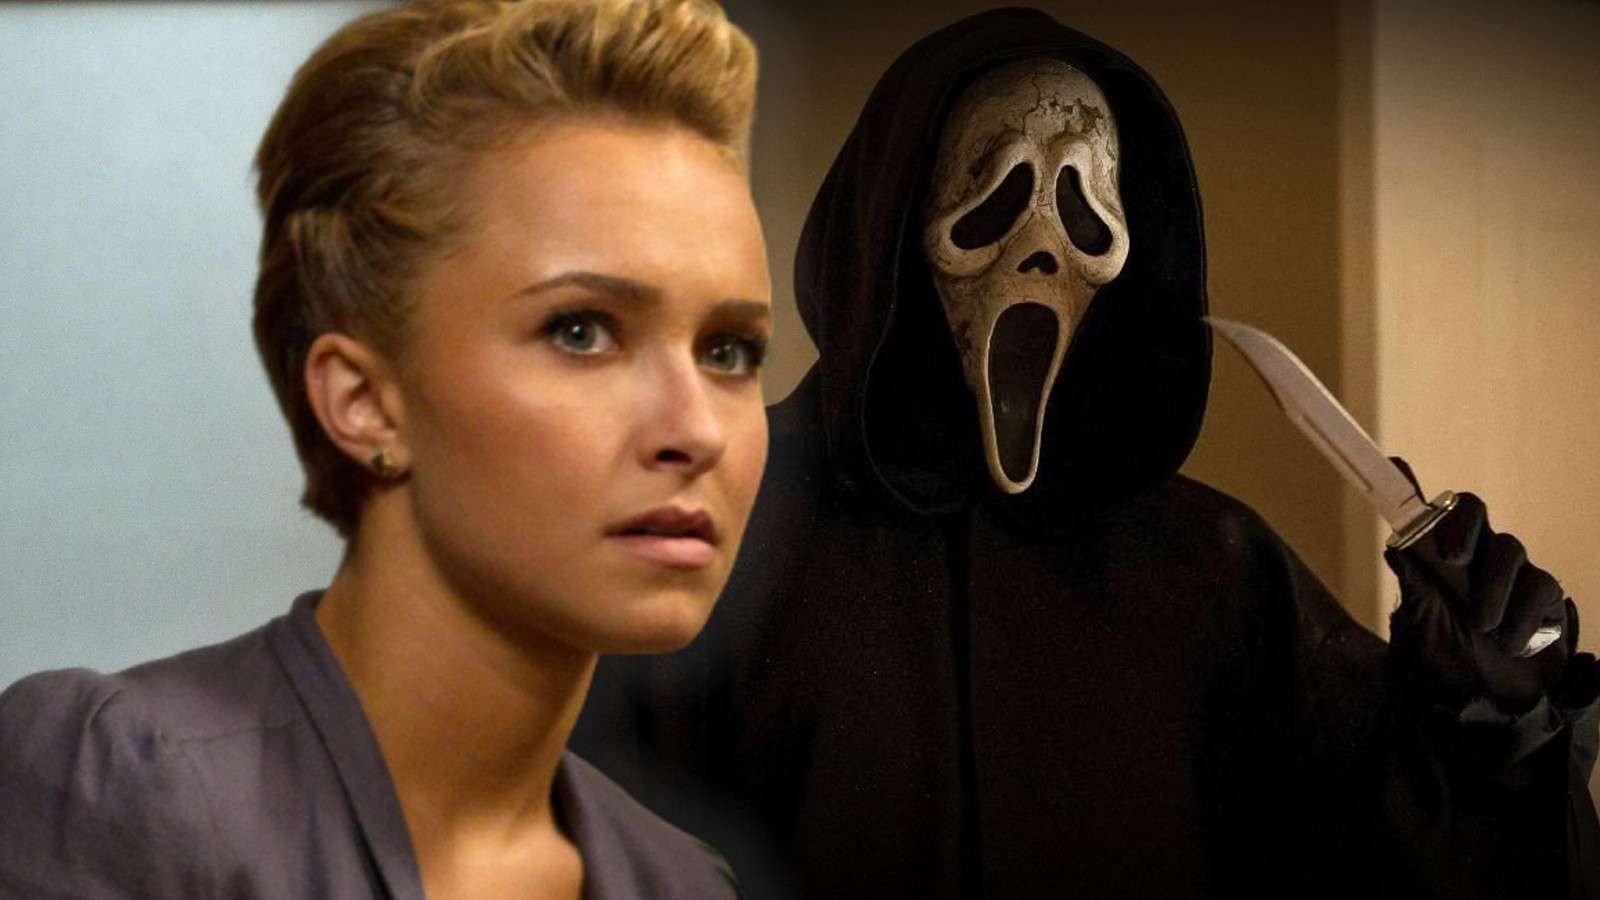 Hayden Panettiere as Kirby Reed in Scream 4 and a still from Scream 6